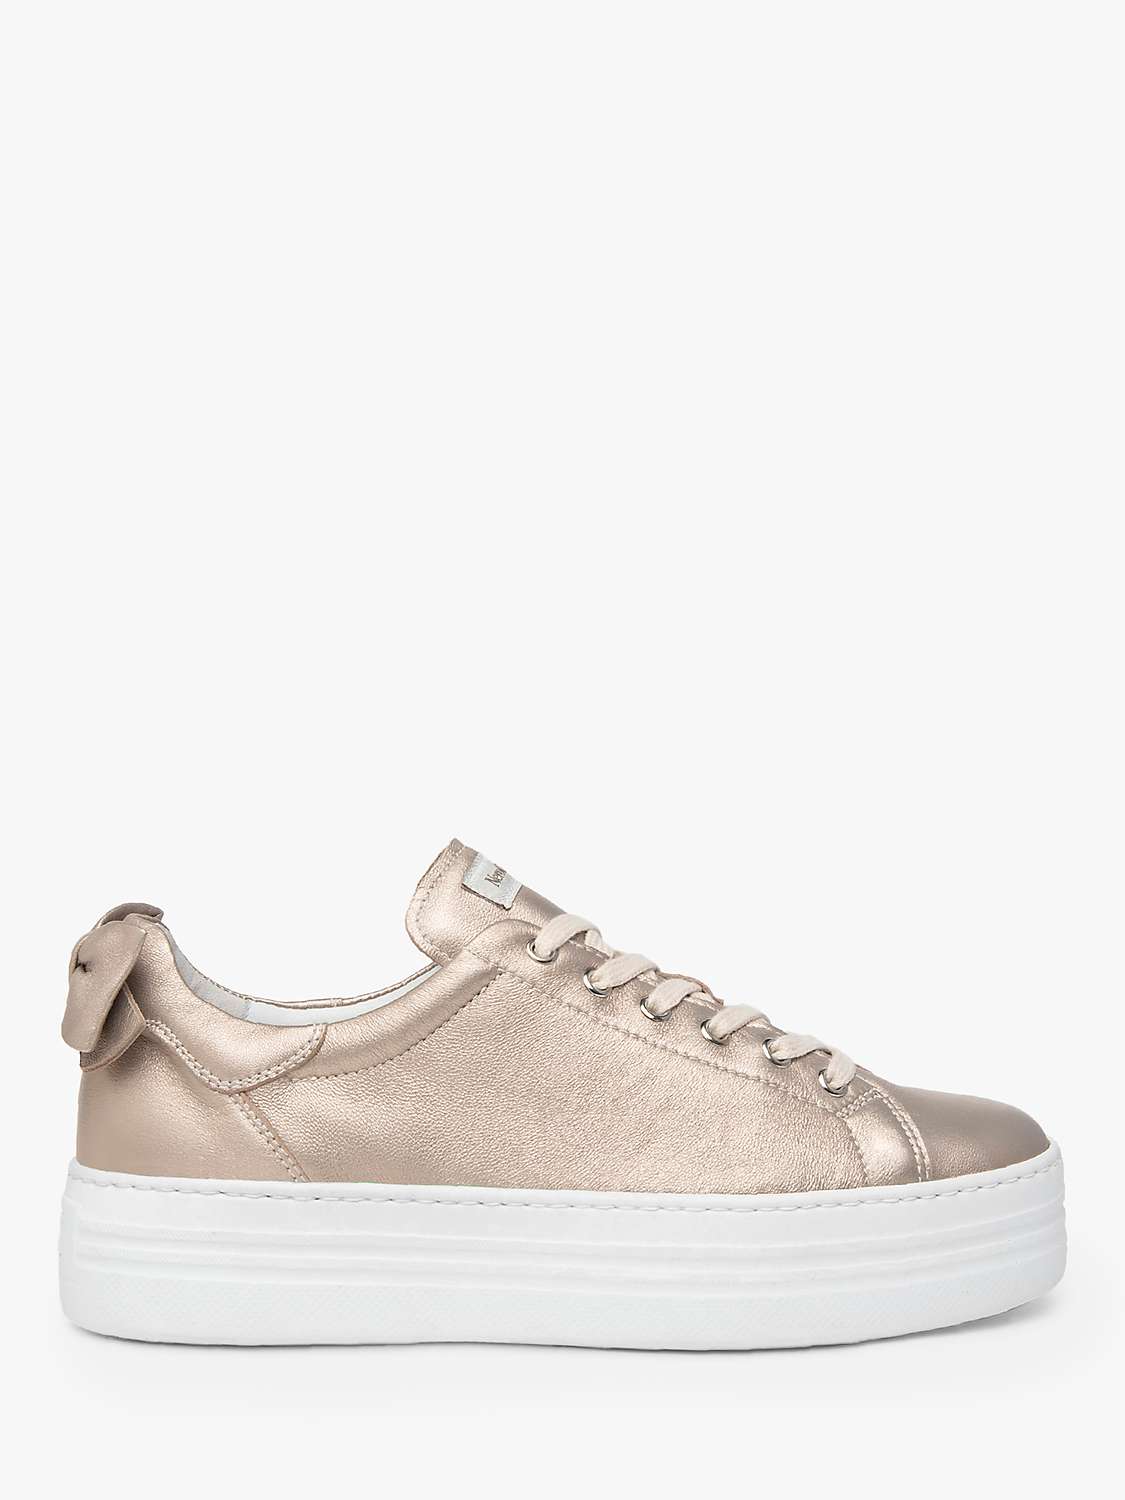 Buy NeroGiardini Bow Leather Trainers, Gold Online at johnlewis.com